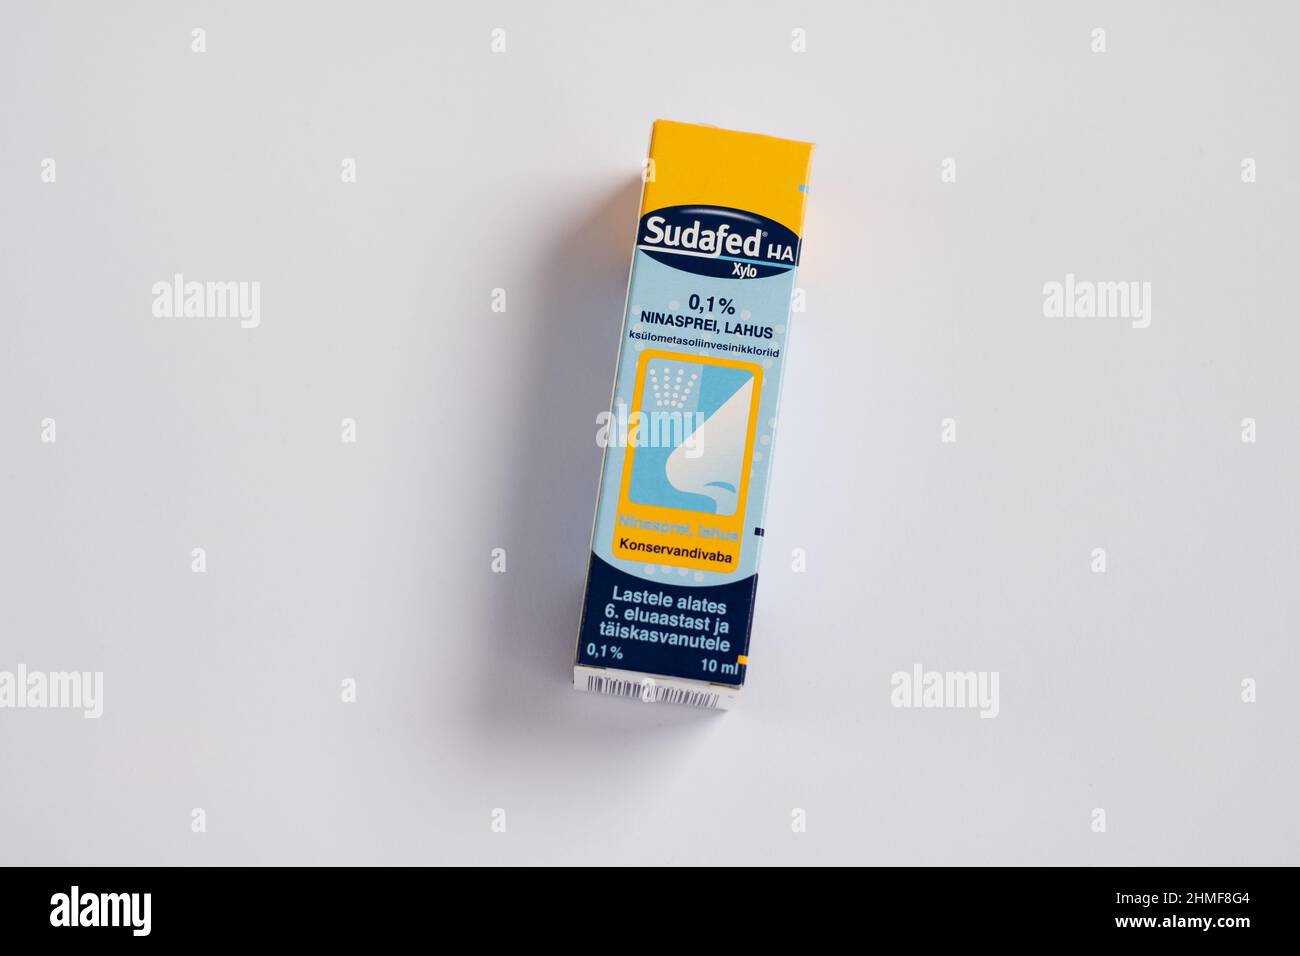 Tallinn, Estonia - 02.08.2022: Sudafed xylometazoline hydrochloride nasal spray by McNeil Healthcare to release clogged nose and cavities due to cold, Stock Photo